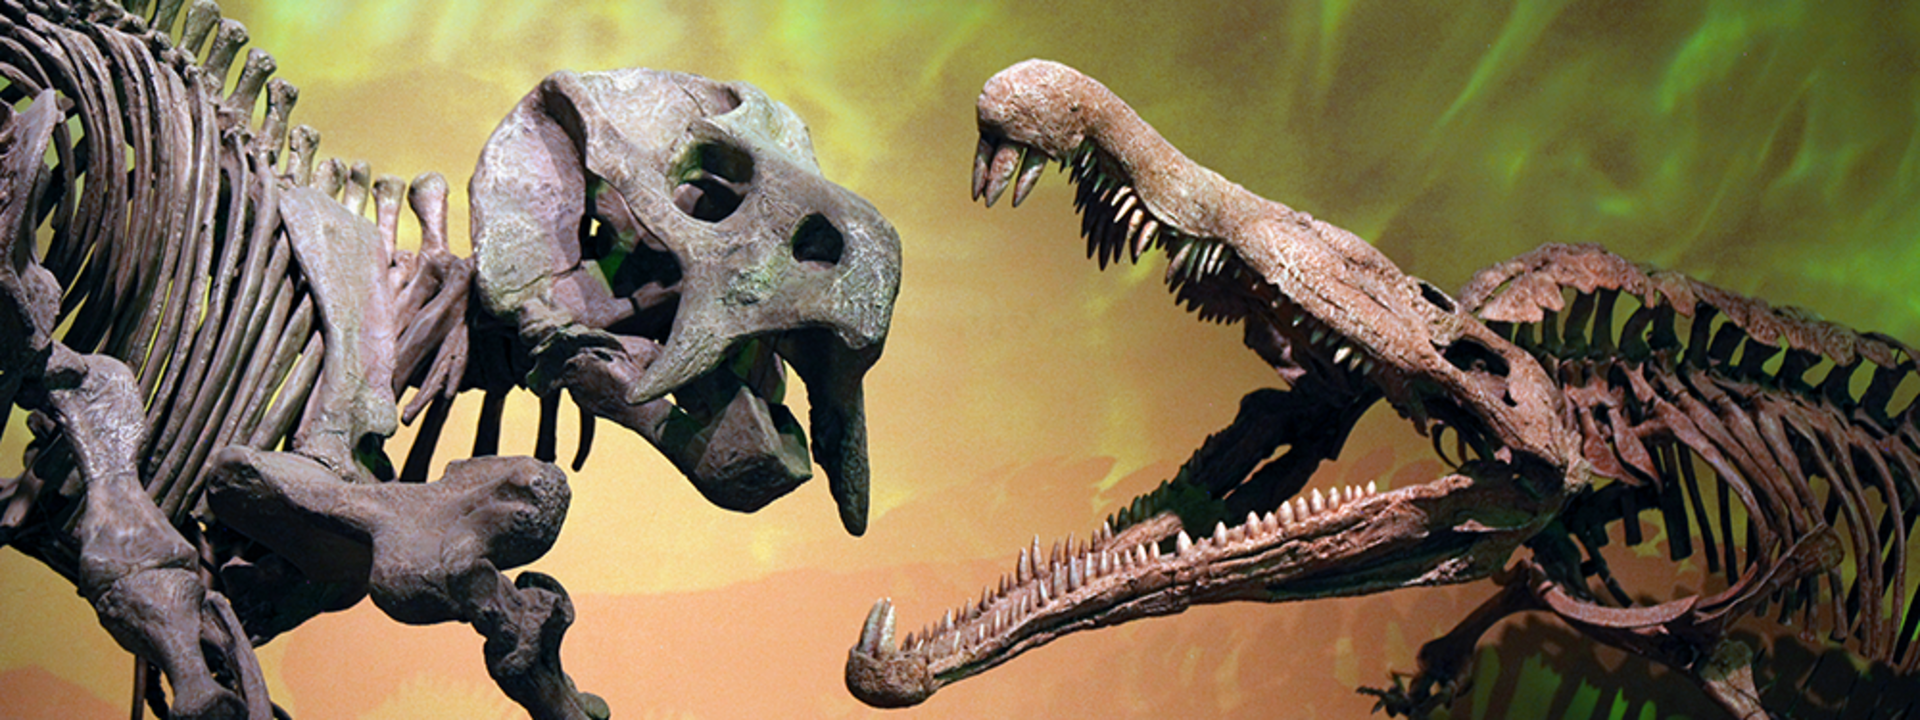 The Albuquerque Museum of Natural History features dinosaur skeletons like these two happy guys.